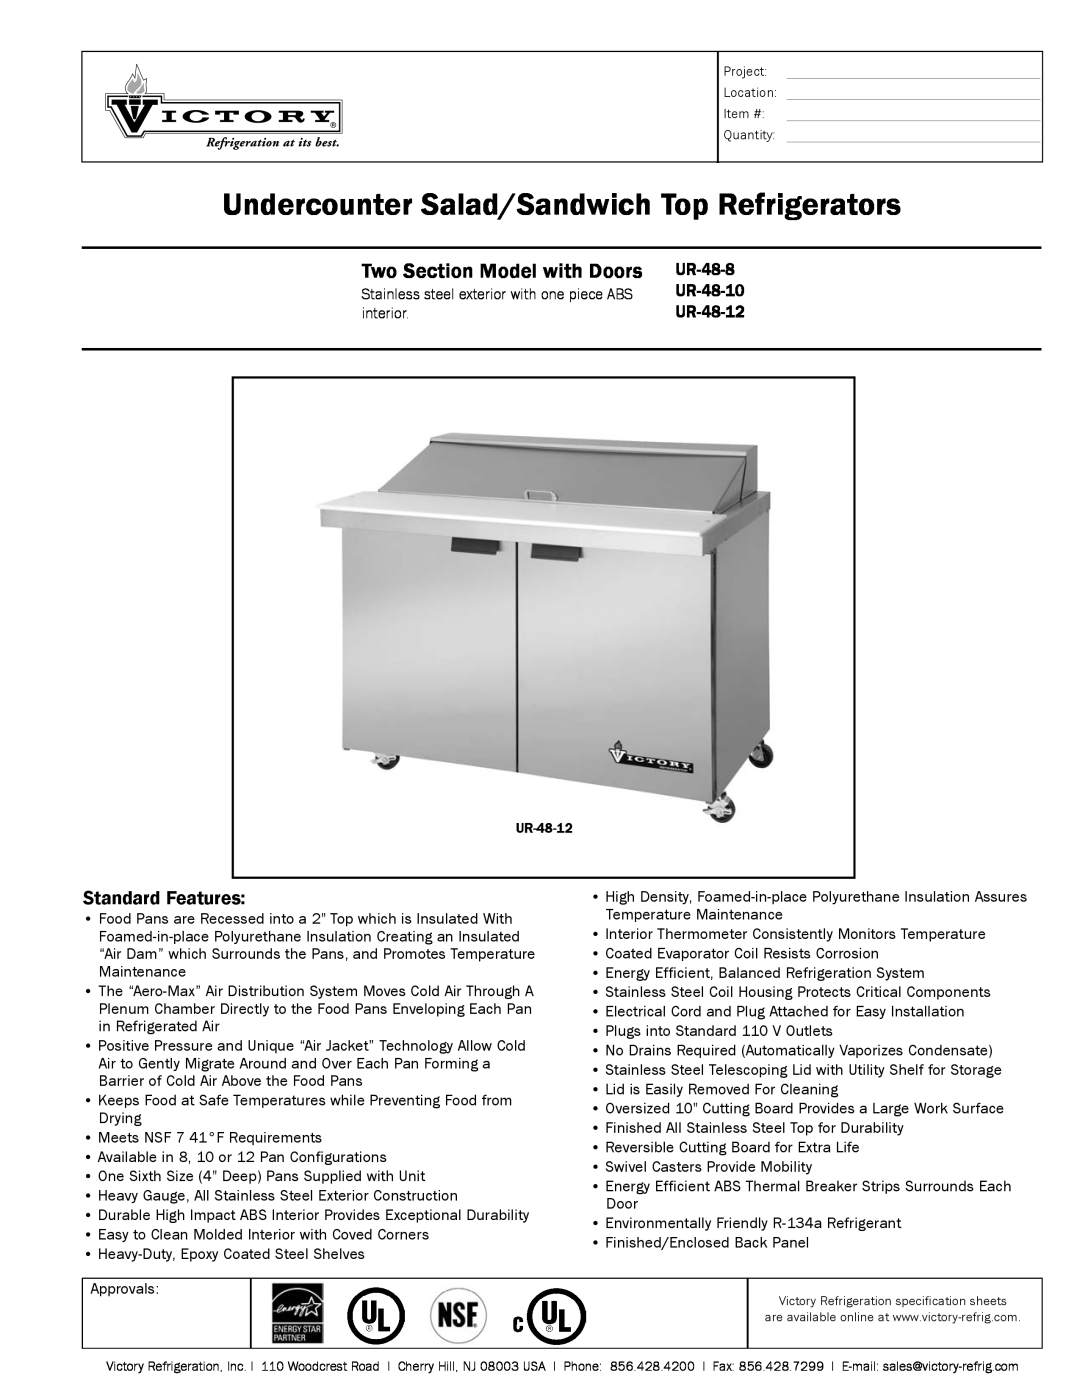 Victory Refrigeration UR-48-12 specifications Undercounter Salad/Sandwich Top Refrigerators, Two Section Model with Doors 